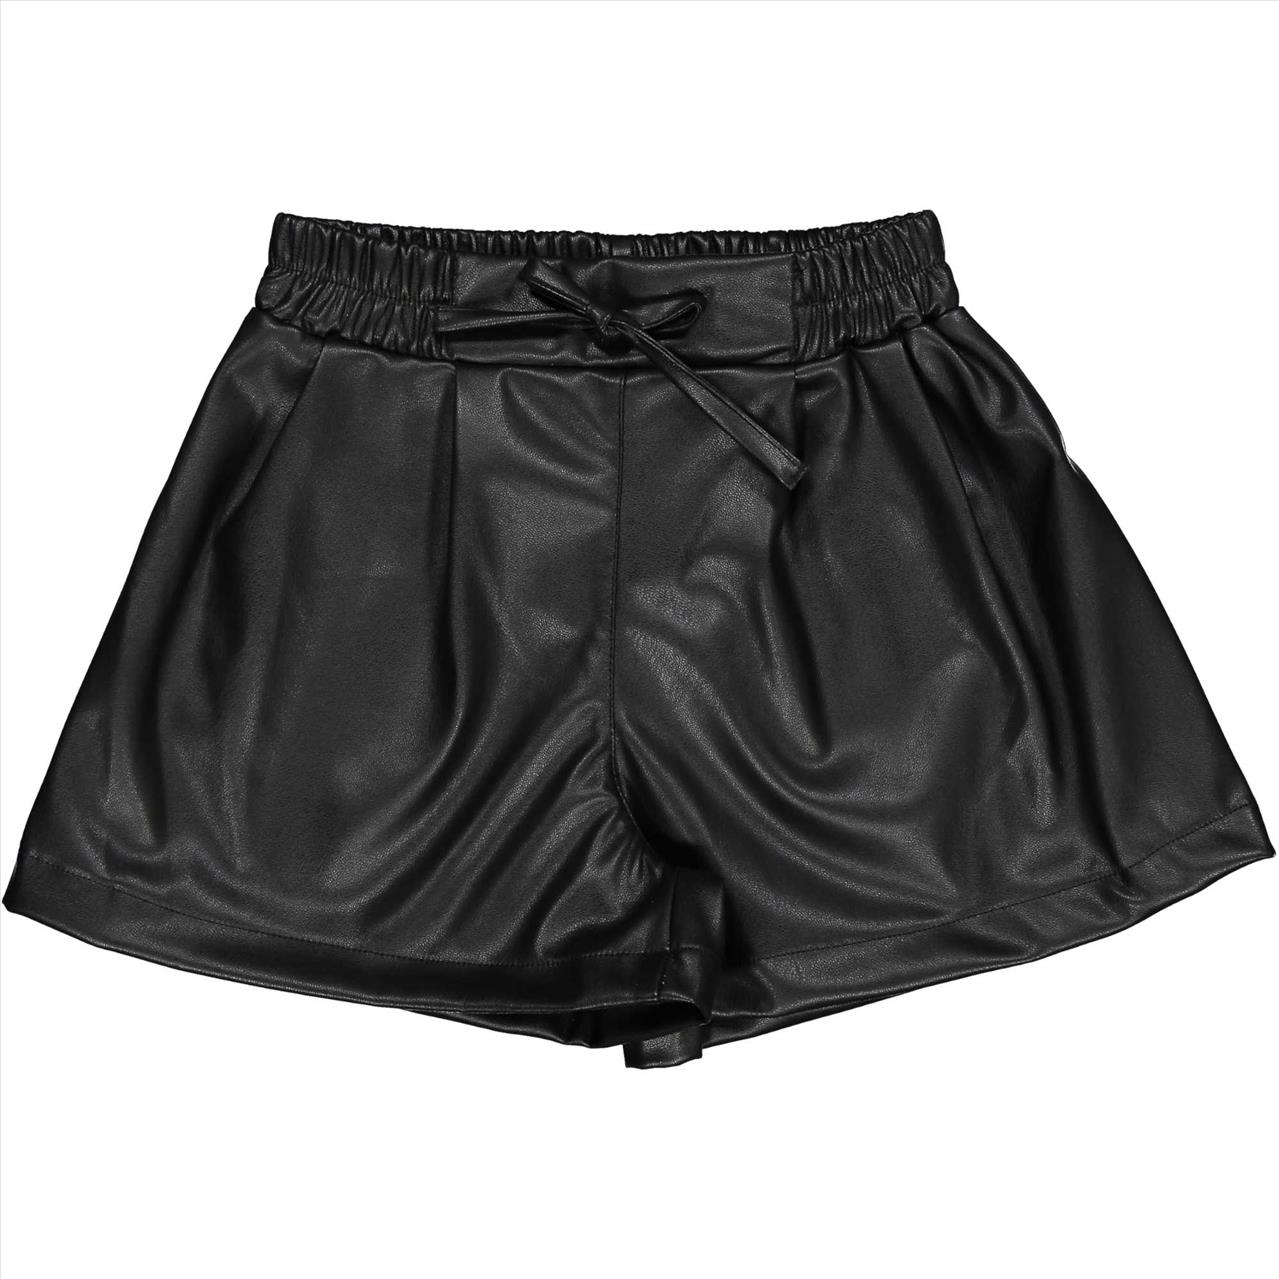 SHORTS FAUX LEATHER BLACK GIRL TRYBEYOND S6-16